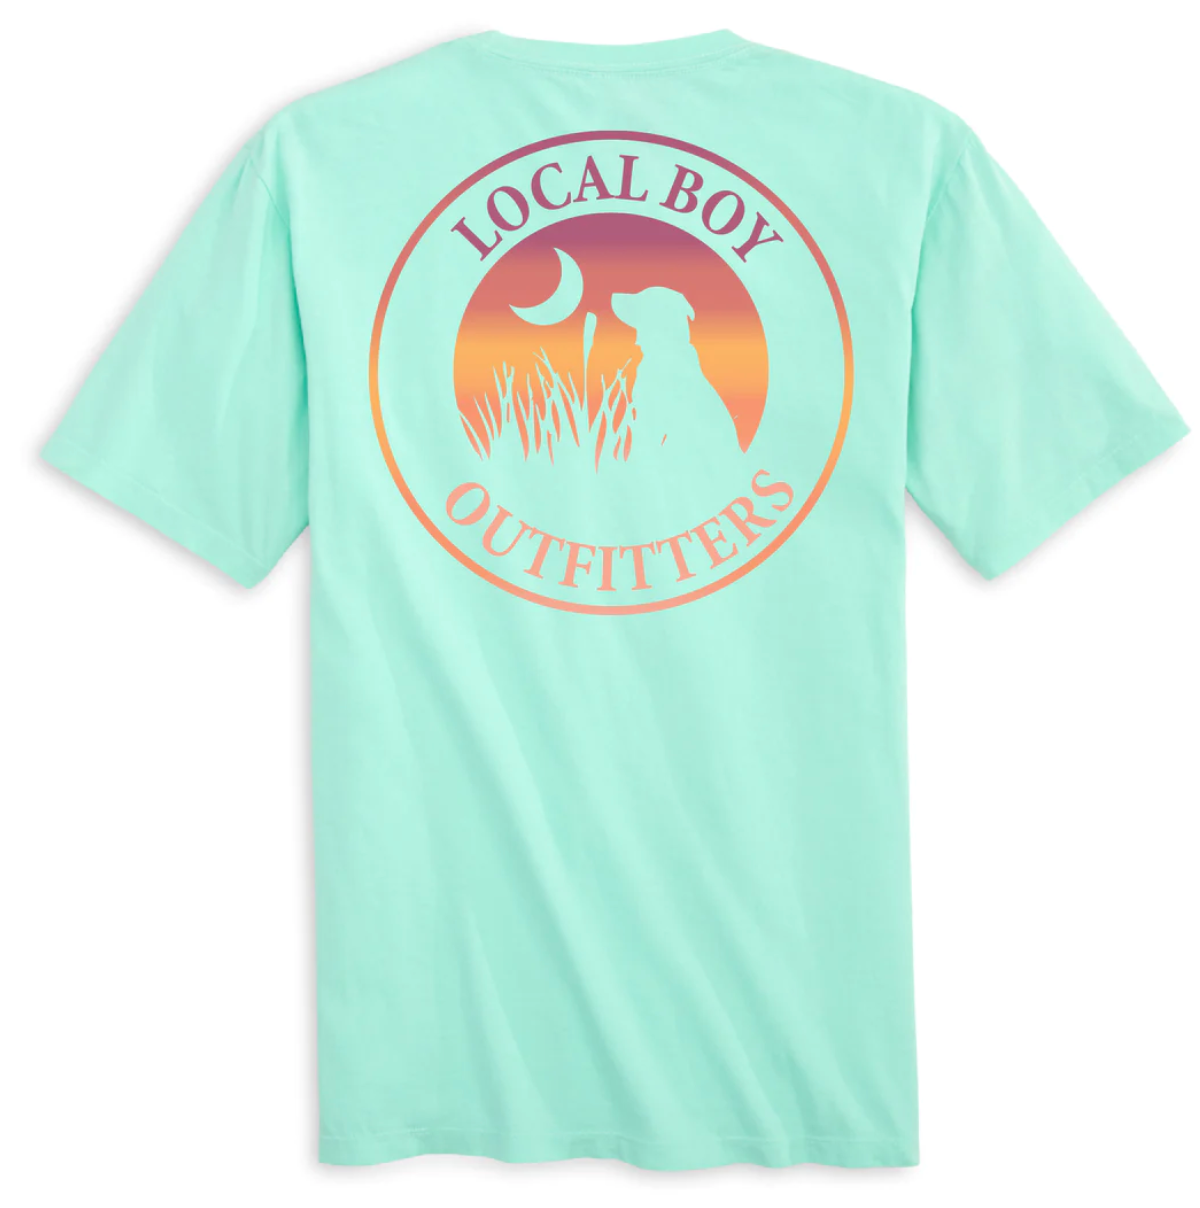 LOCAL BOY OUTFITTERS SUNSET SPRING ISLAND REEF SHORT SLEEVE***